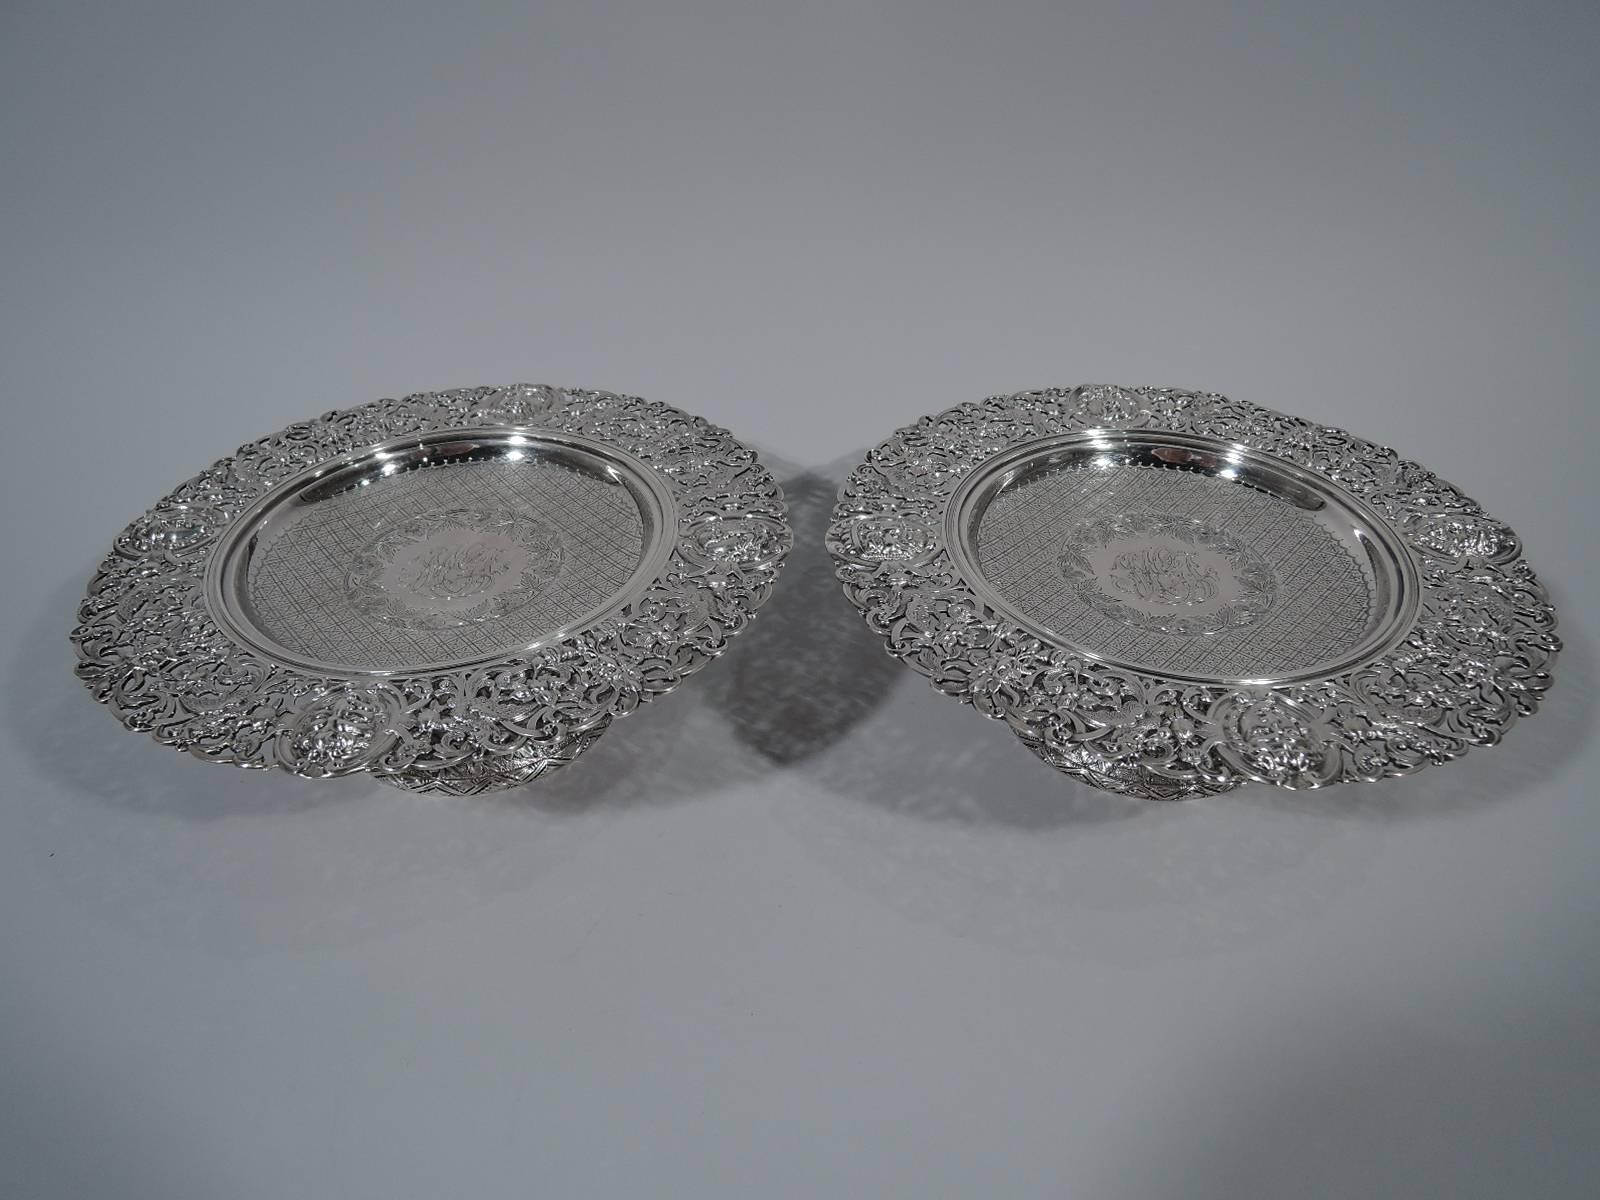 Pair of Renaissance Revival sterling silver compotes. Made by Howard & Co. in New York in 1889. Each: Shallow well with engraved diaper pattern and central floral wreath with interlaced script monogram. Wide pierced rim with Classical masks,